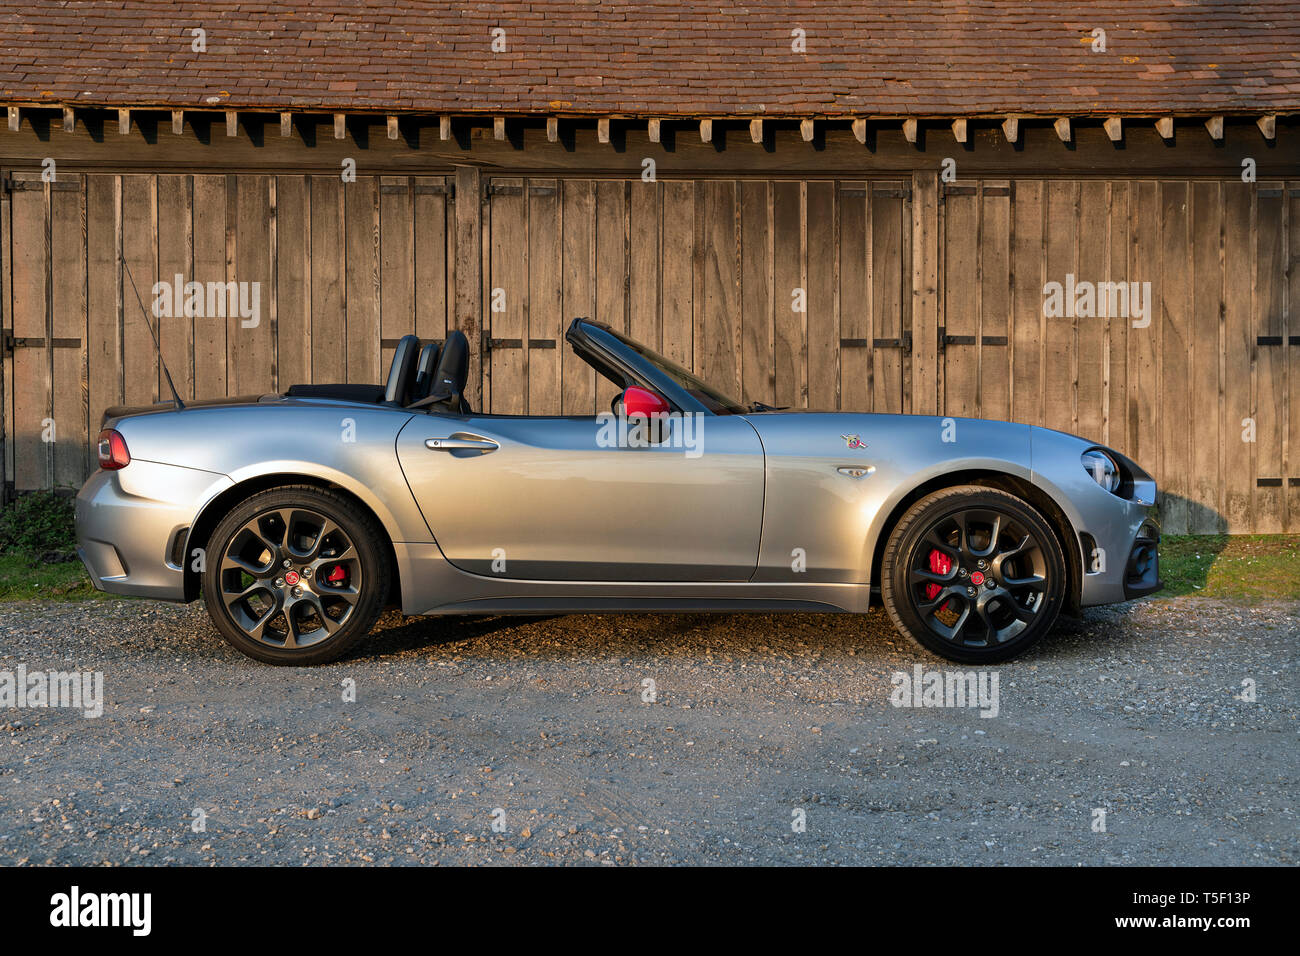 2018 Fiat 124 Spider Abarth Banque D'Images